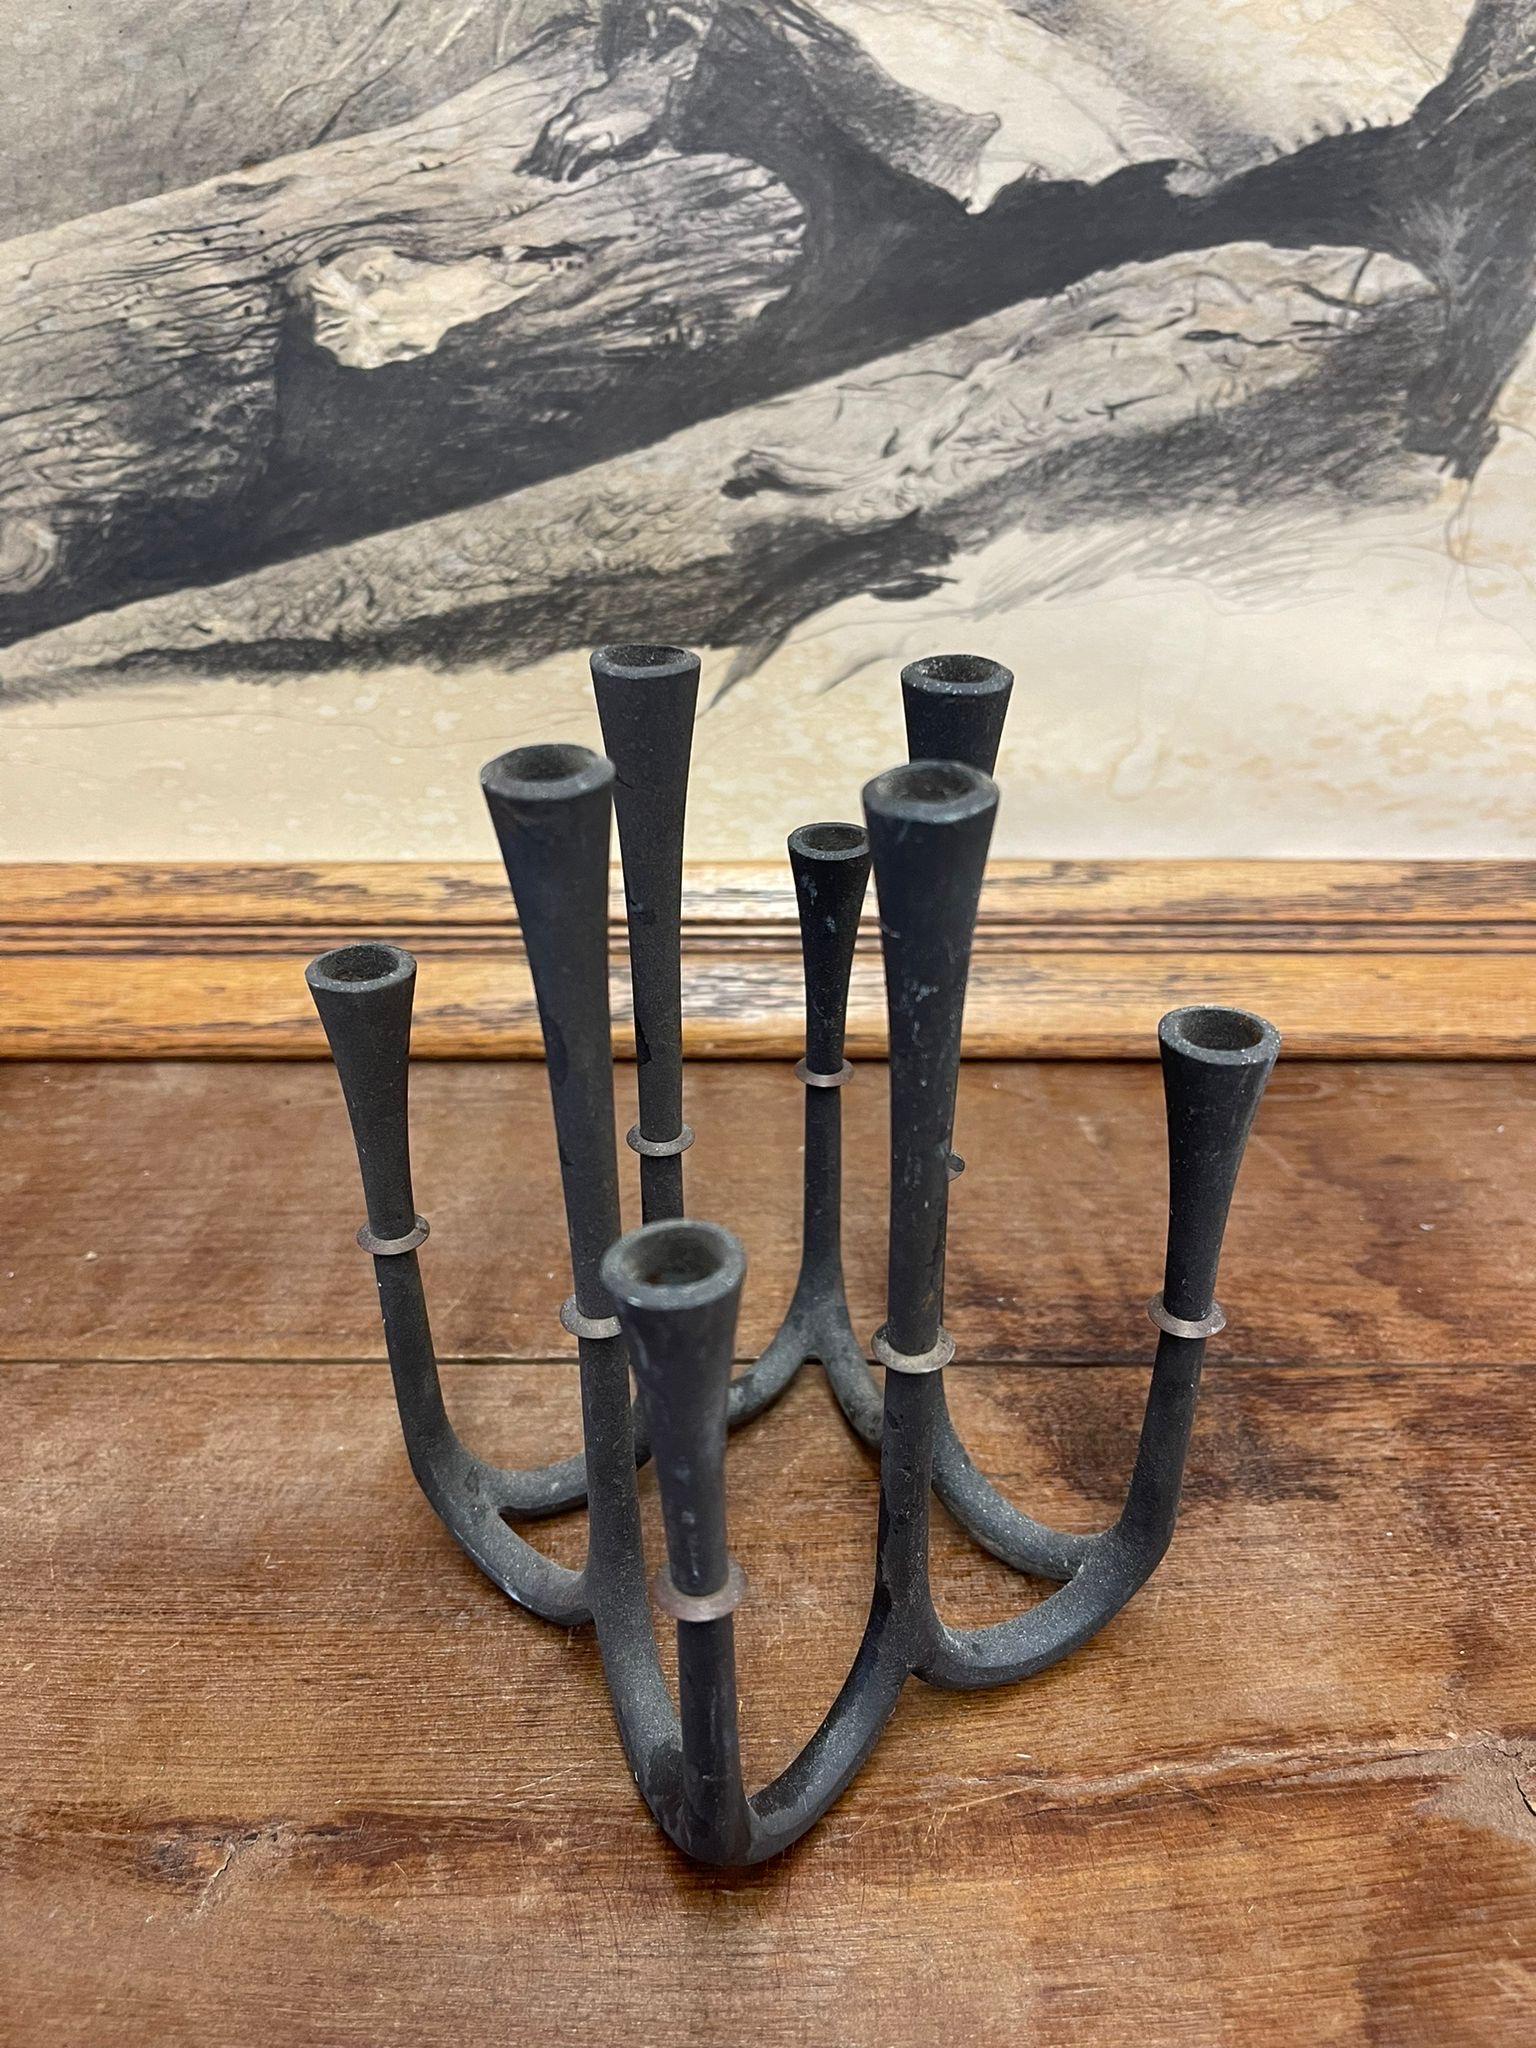 Eight Arm Candle Holder. Brutalist Design. Possibly Cast Iron . Vintage Condition Consistent with Age as Pictured.

Dimensions. 5 1/2 W ; 5 1/2 D ; 6 3/4 D